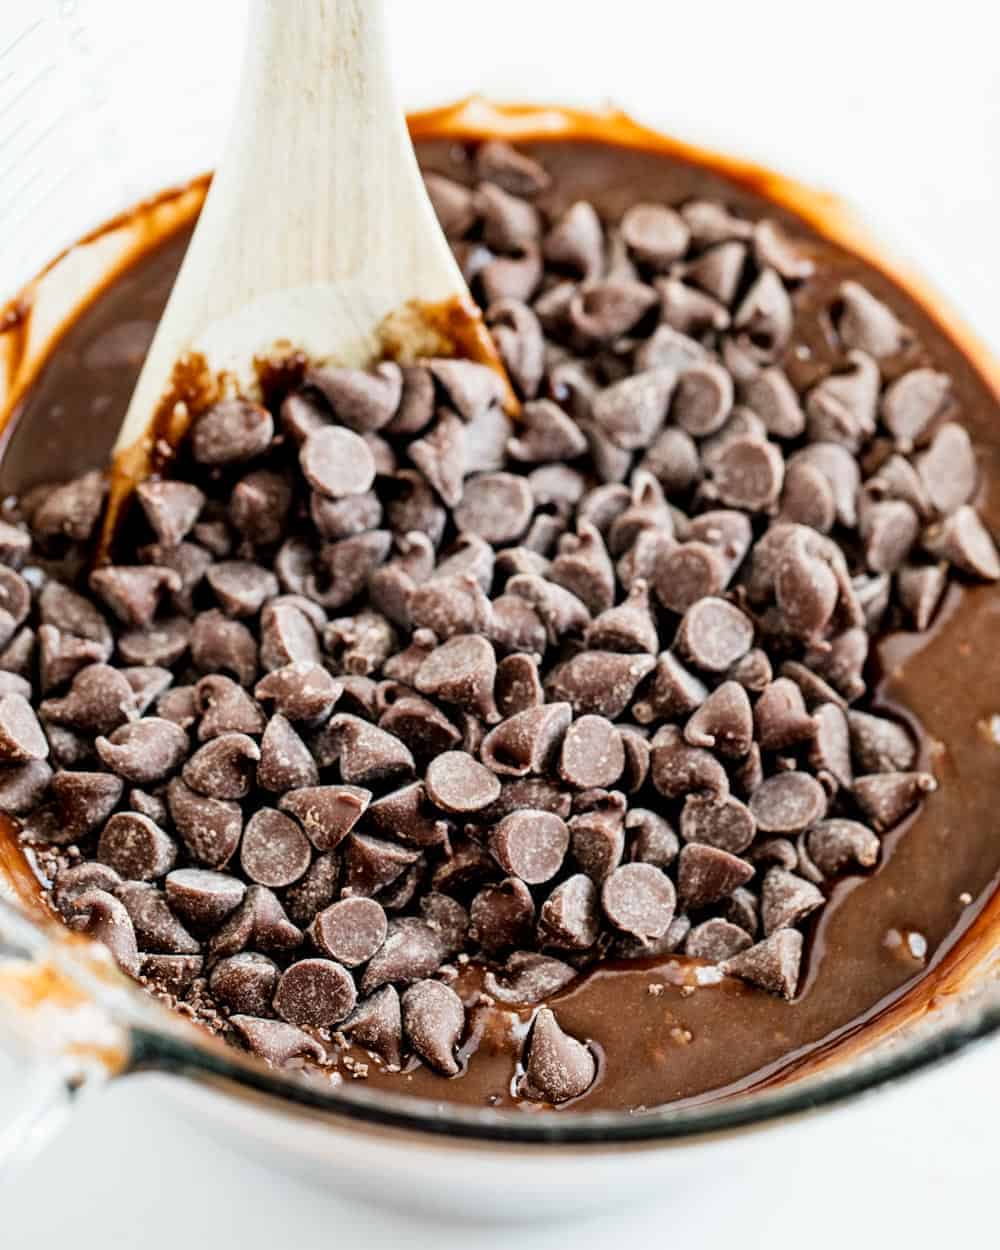 Folding chocolate chips into brownie batter with wooden spoon.